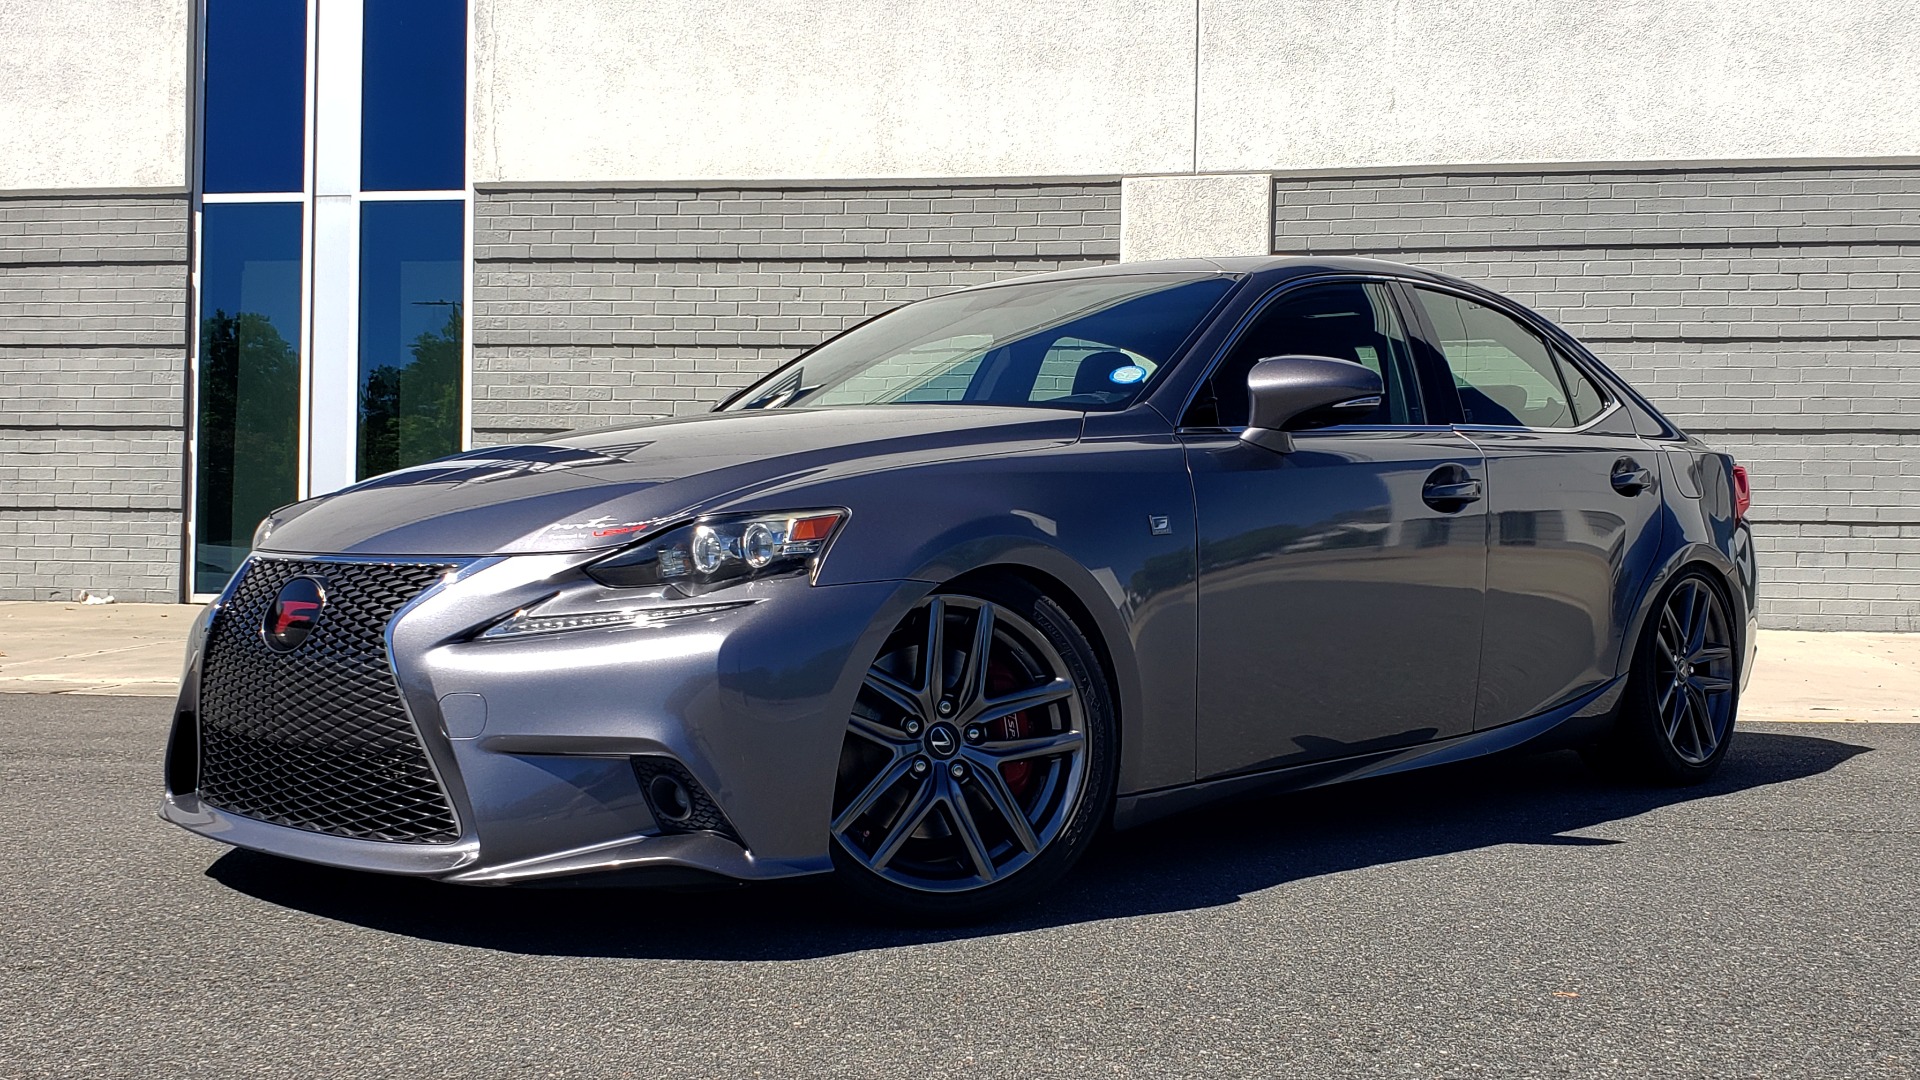 Used 2016 Lexus IS 200T F-SPORT SEDAN / SUNROOF / LCA / HTD & CLD SEATS / REARVIEW for sale Sold at Formula Imports in Charlotte NC 28227 1